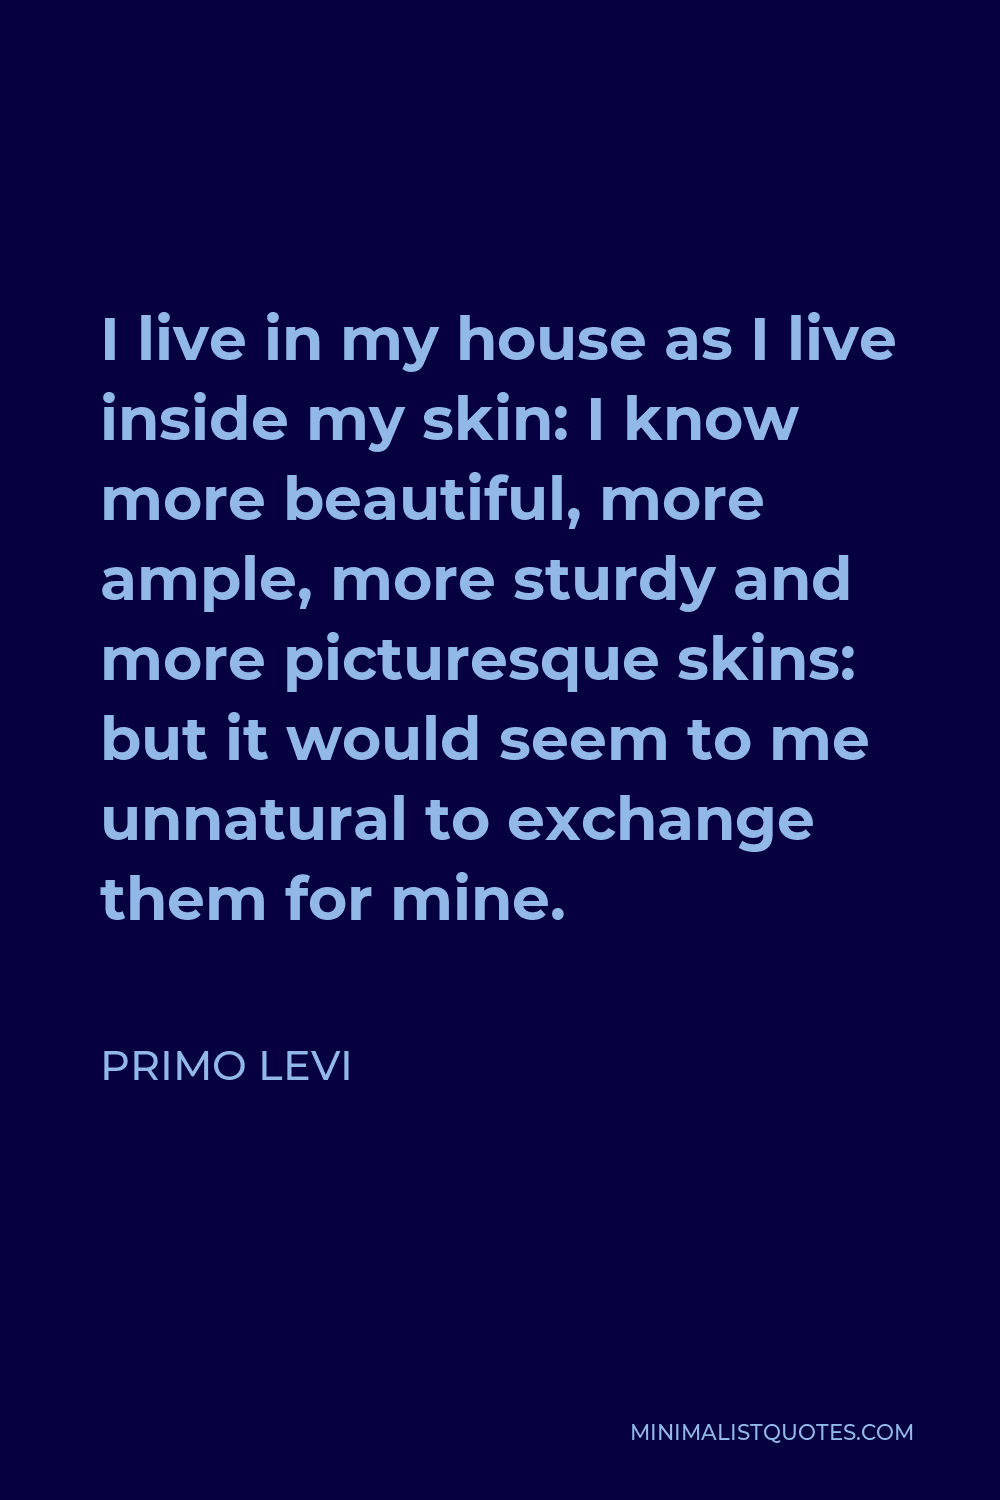 Primo Levi Quote - I live in my house as I live inside my skin: I know more beautiful, more ample, more sturdy and more picturesque skins: but it would seem to me unnatural to exchange them for mine.